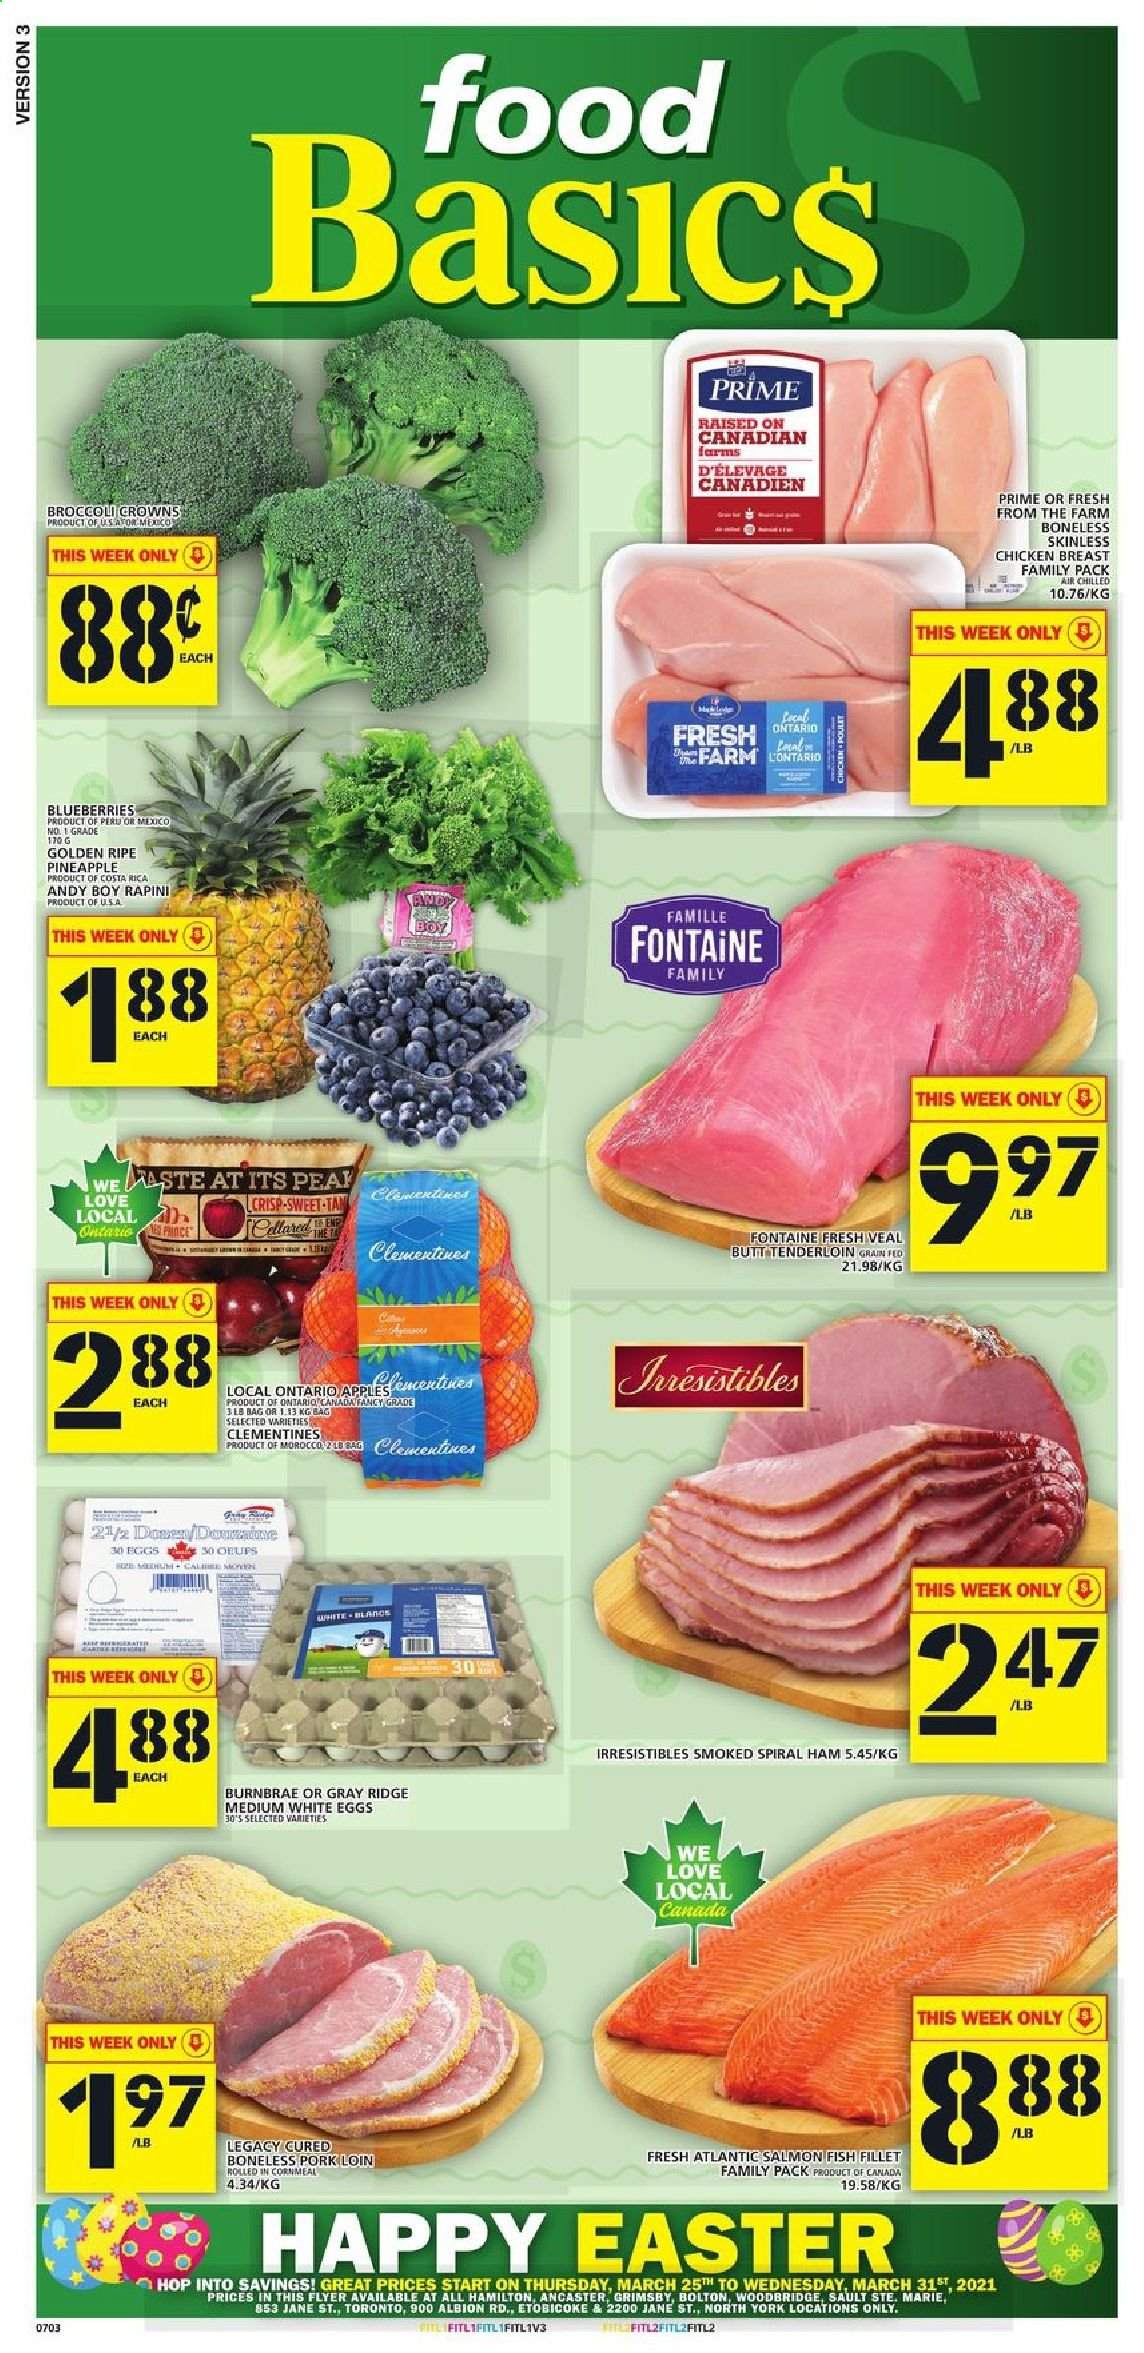 thumbnail - Food Basics Flyer - March 25, 2021 - March 31, 2021 - Sales products - apples, blueberries, clementines, pineapple, fish fillets, salmon, fish, ham, spiral ham, eggs, Woodbridge, chicken breasts, chicken, pork loin, pork meat. Page 1.